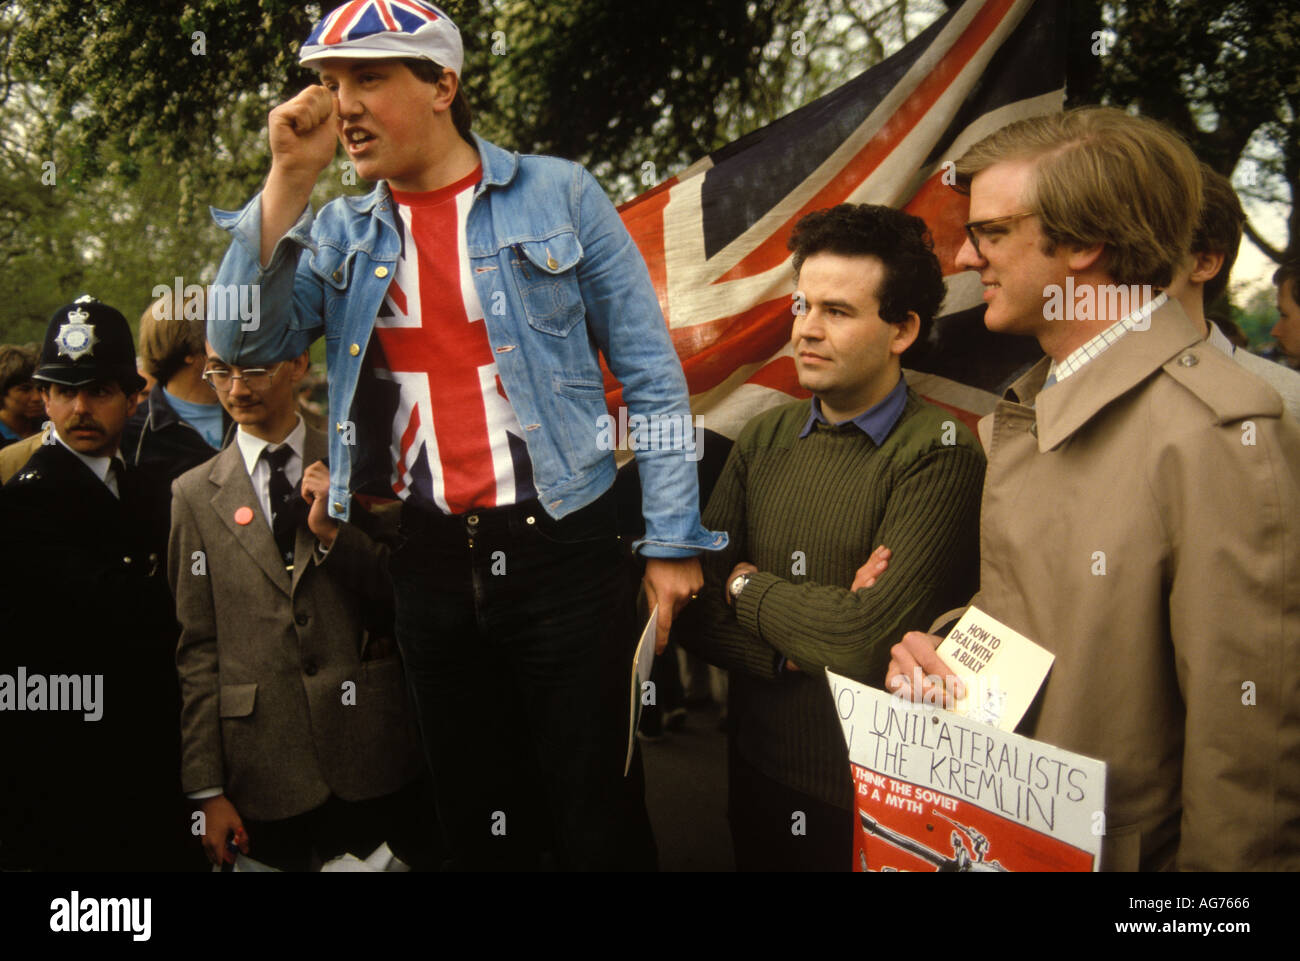 Speakers Corner Hyde Park London UK 1980s. Political rally man makes rude gesture at an Anti Soviet political gathering. HOMER SYKES Stock Photo